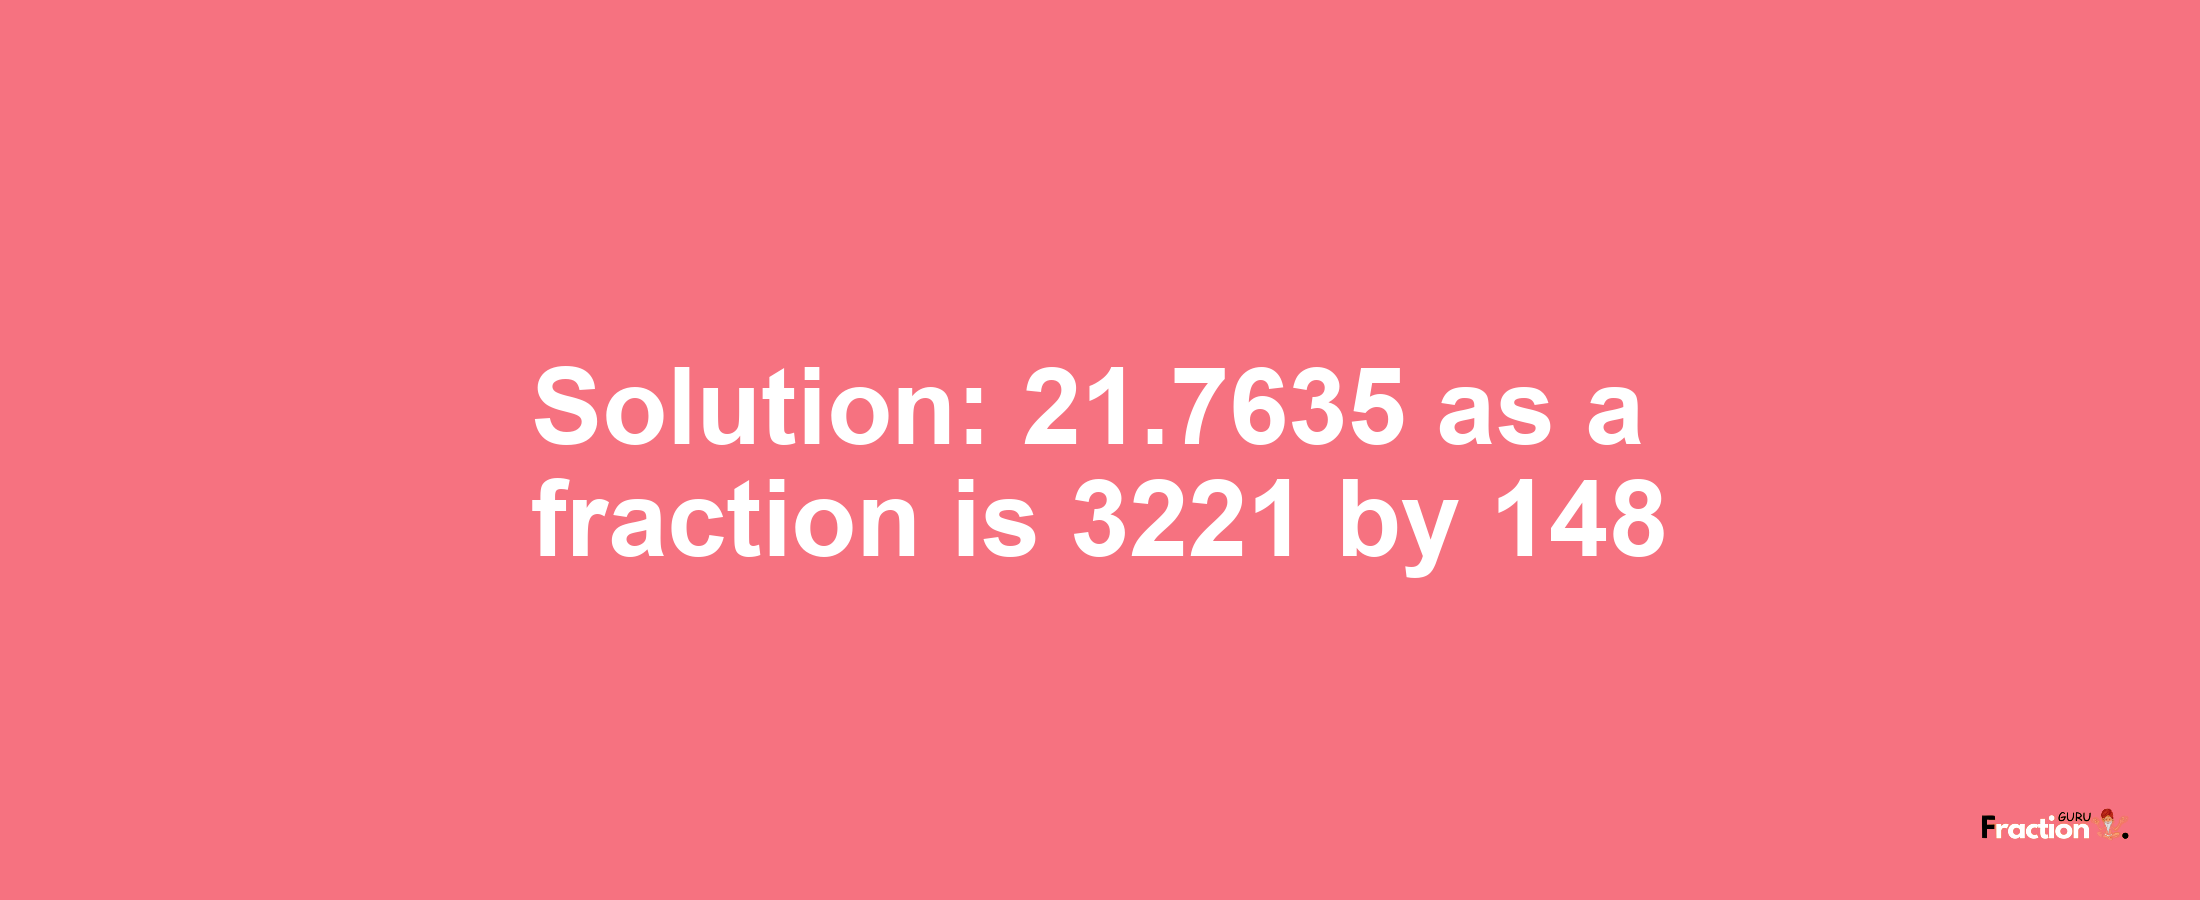 Solution:21.7635 as a fraction is 3221/148